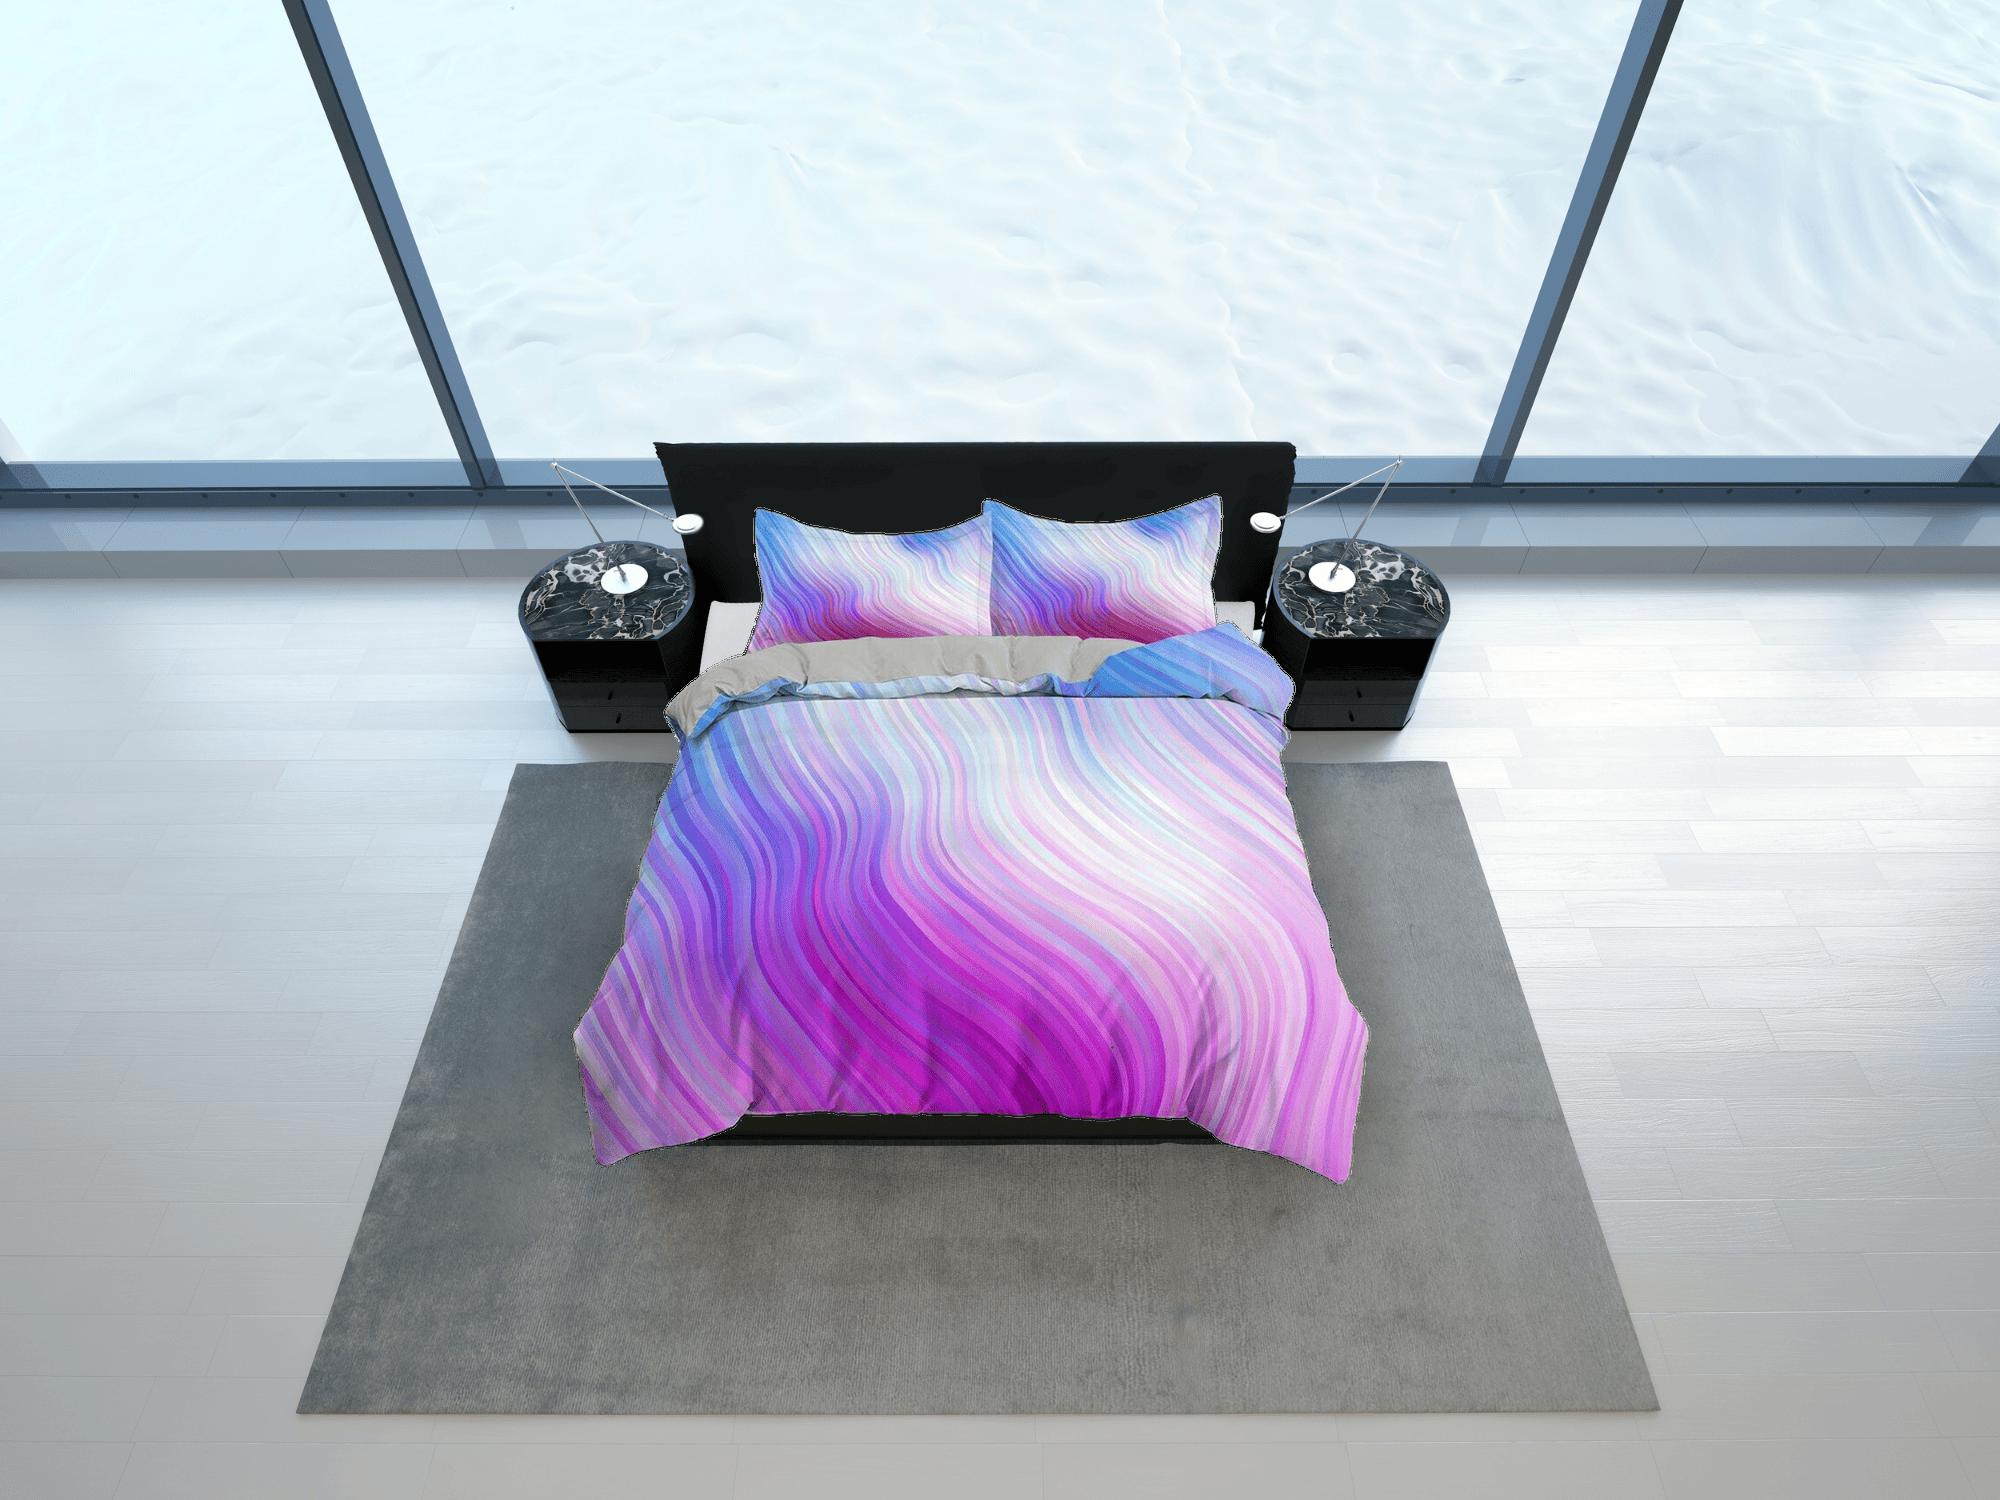 daintyduvet Contemporary bedroom set aesthetic pink purple gradient duvet cover, marble abstract art room decor boho chic bedding set full king queen